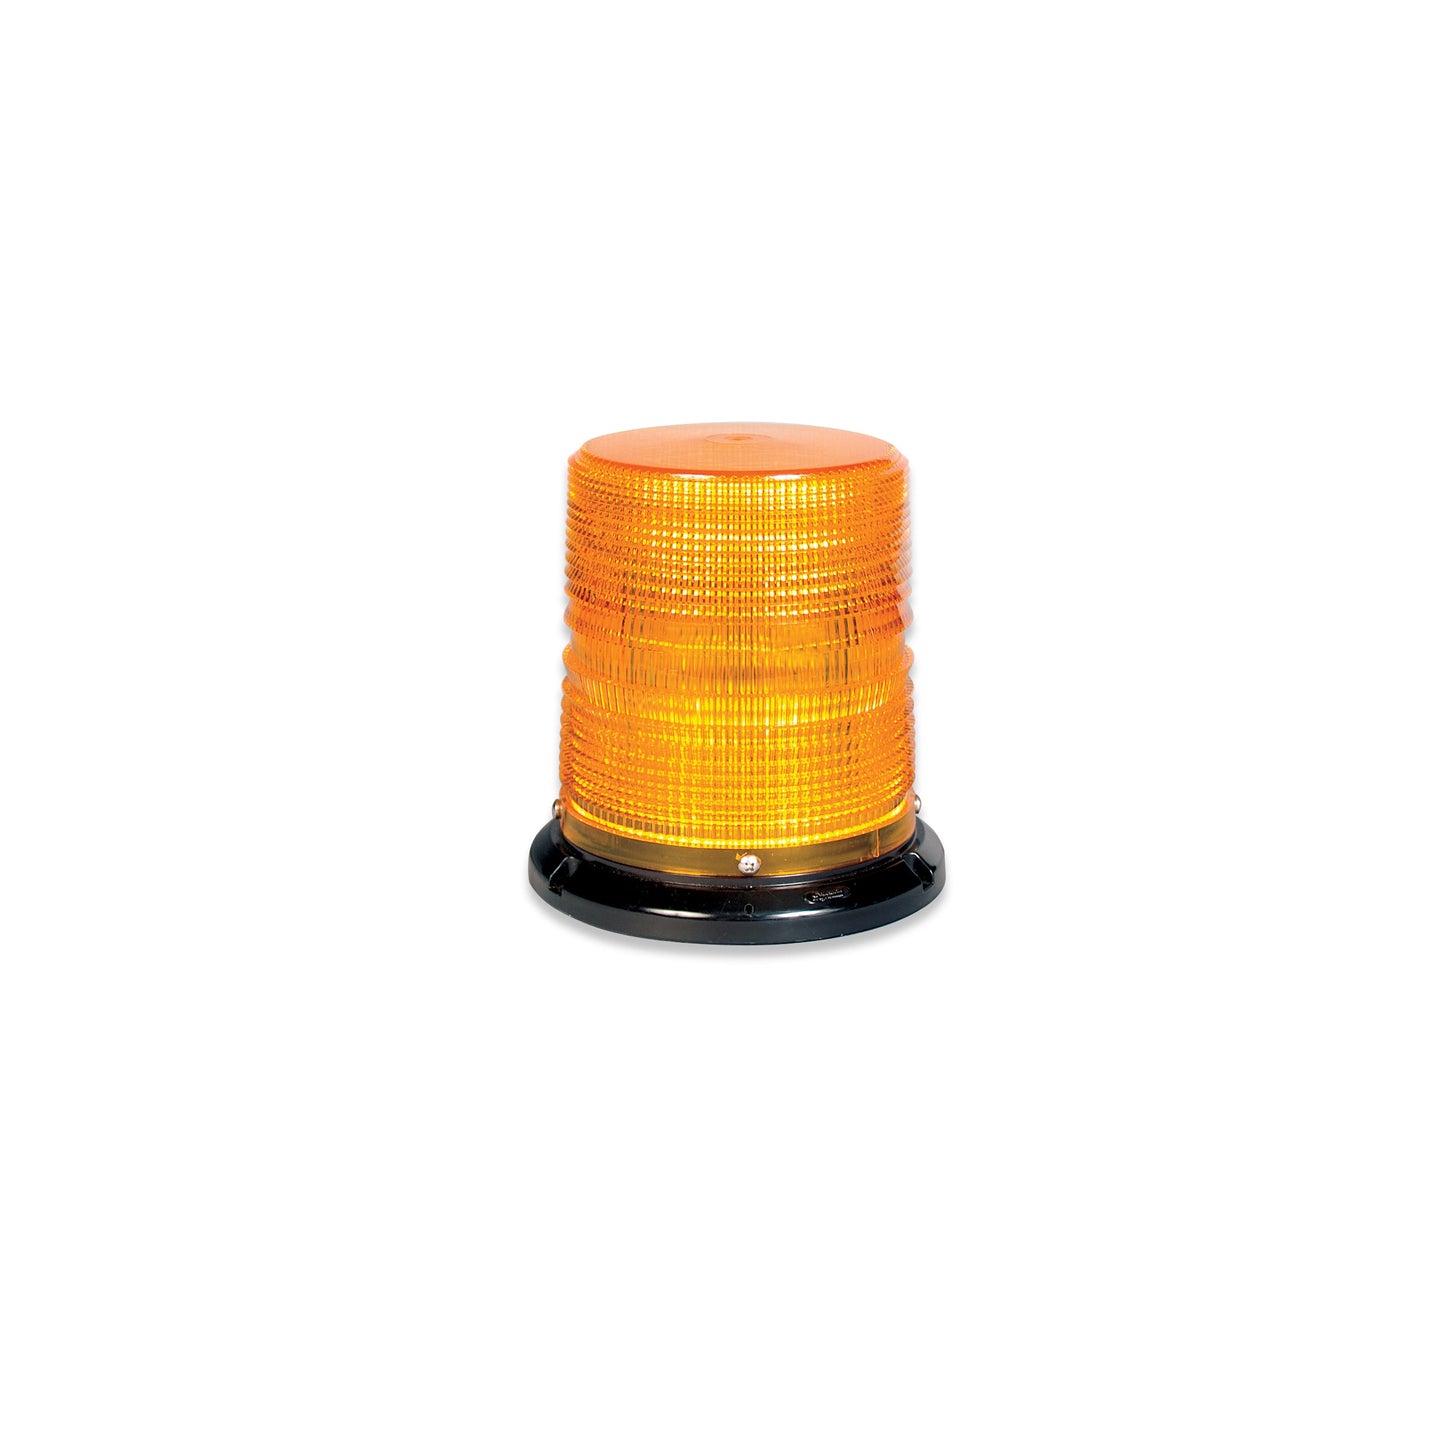 Soundoff Signal ELB45BML+JC 4500 Series Led Beacon, 10-30V, Sae J845 Class 1 - Magnetic Mount, 4" Clear Dome & Red/Blue Leds